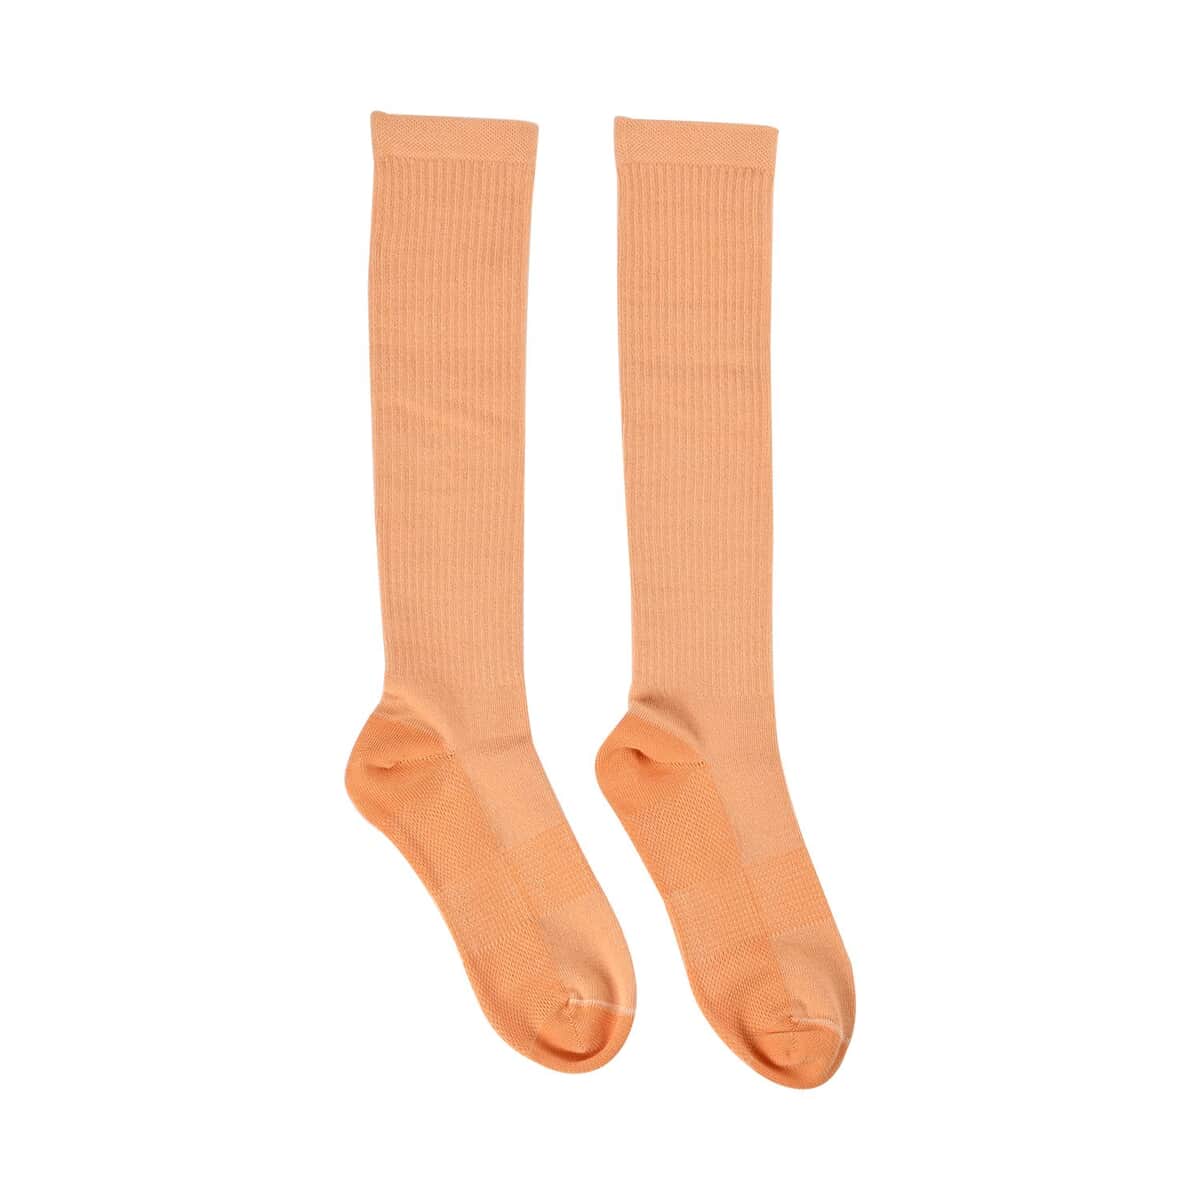 Set of 4 Pairs Copper Infused Compression Knee Length Socks - Classic Multi Color (S/M)  image number 3